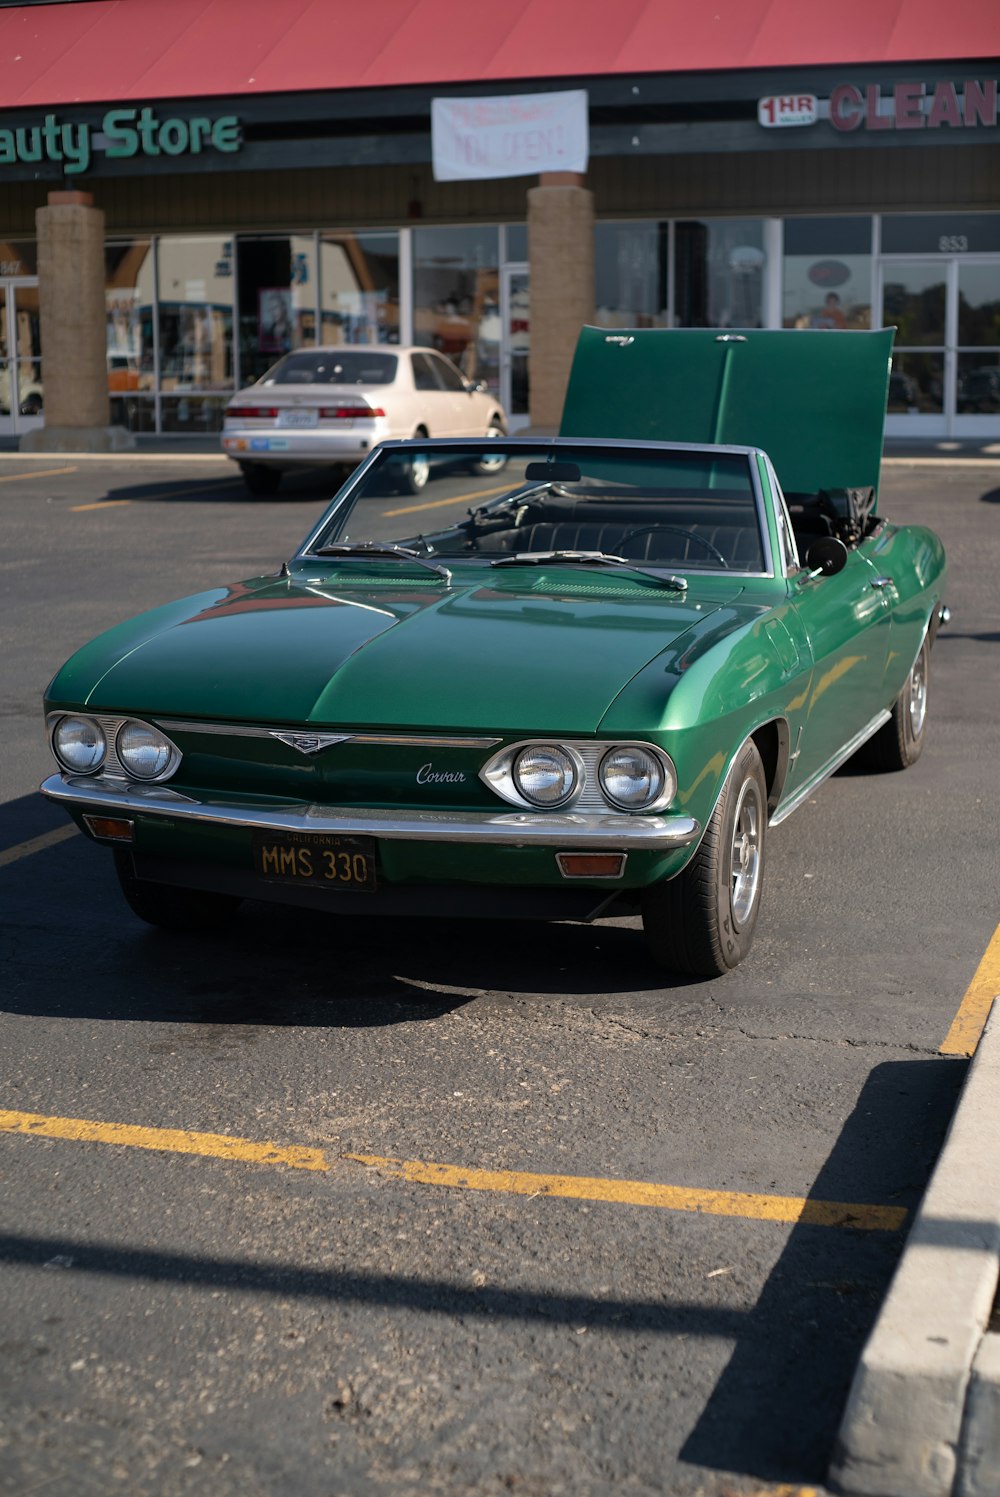 a green car is parked in a parking lot